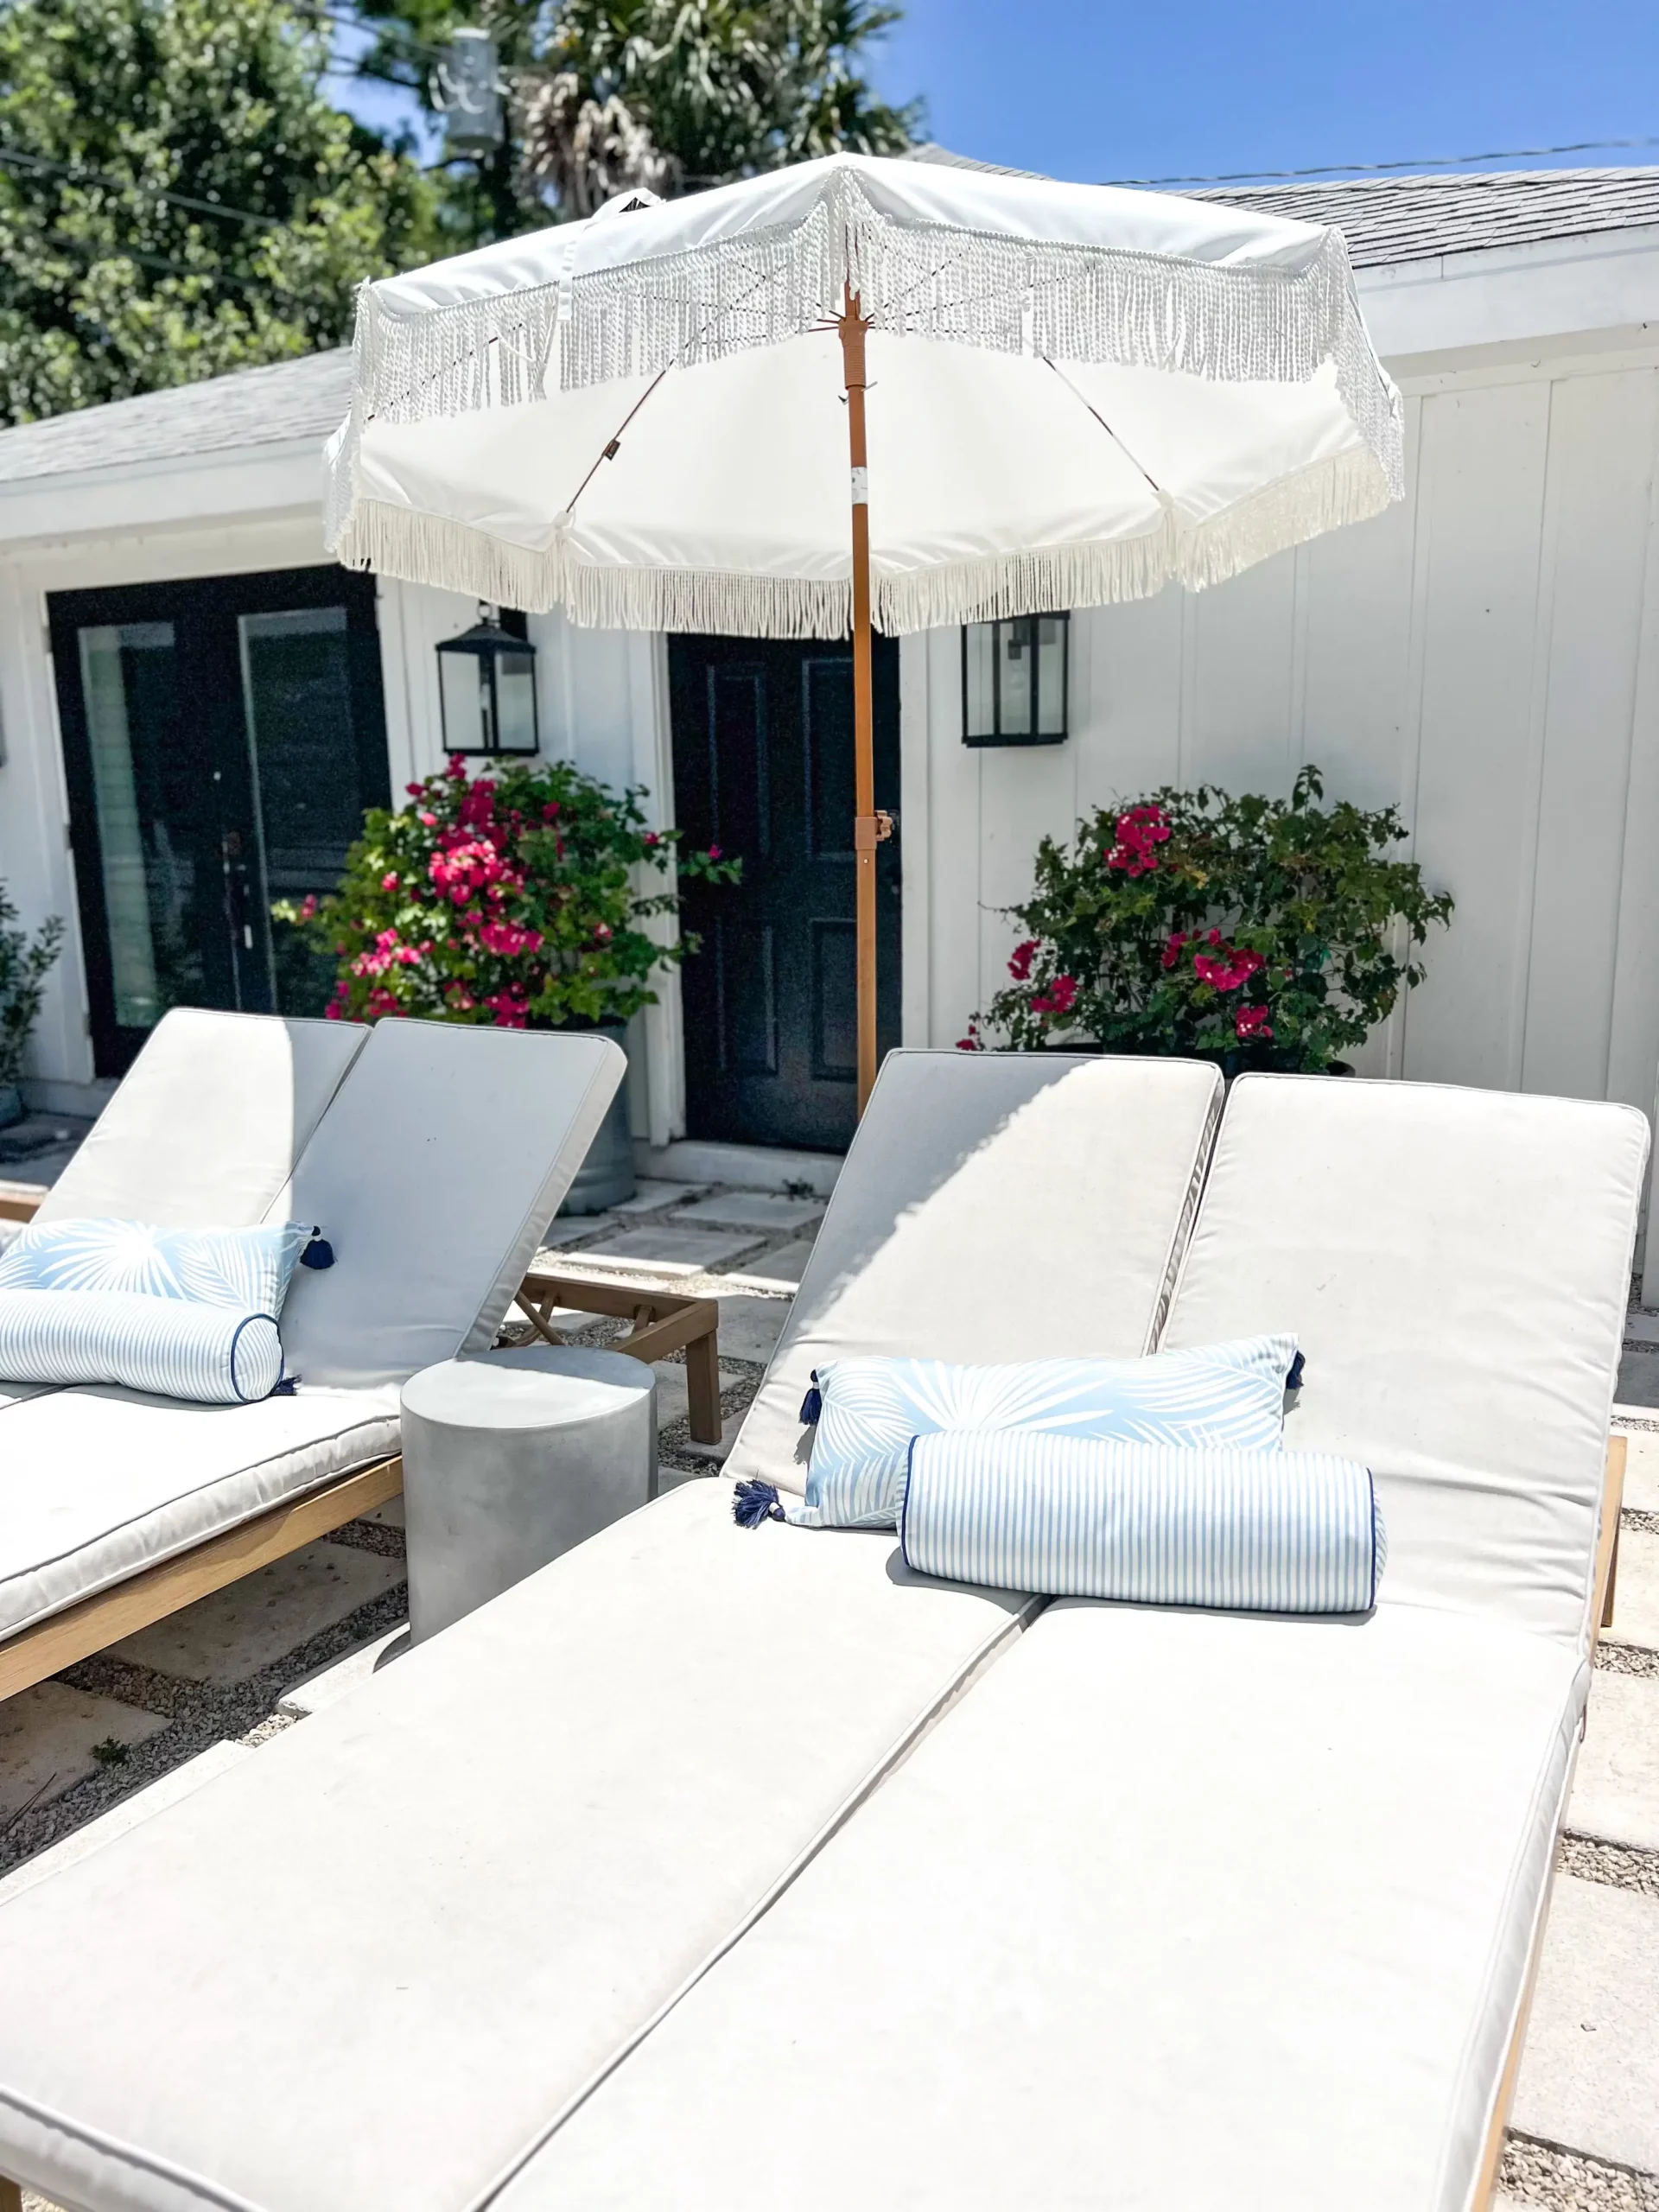 summer chaise loungers with a large white umbrella over them